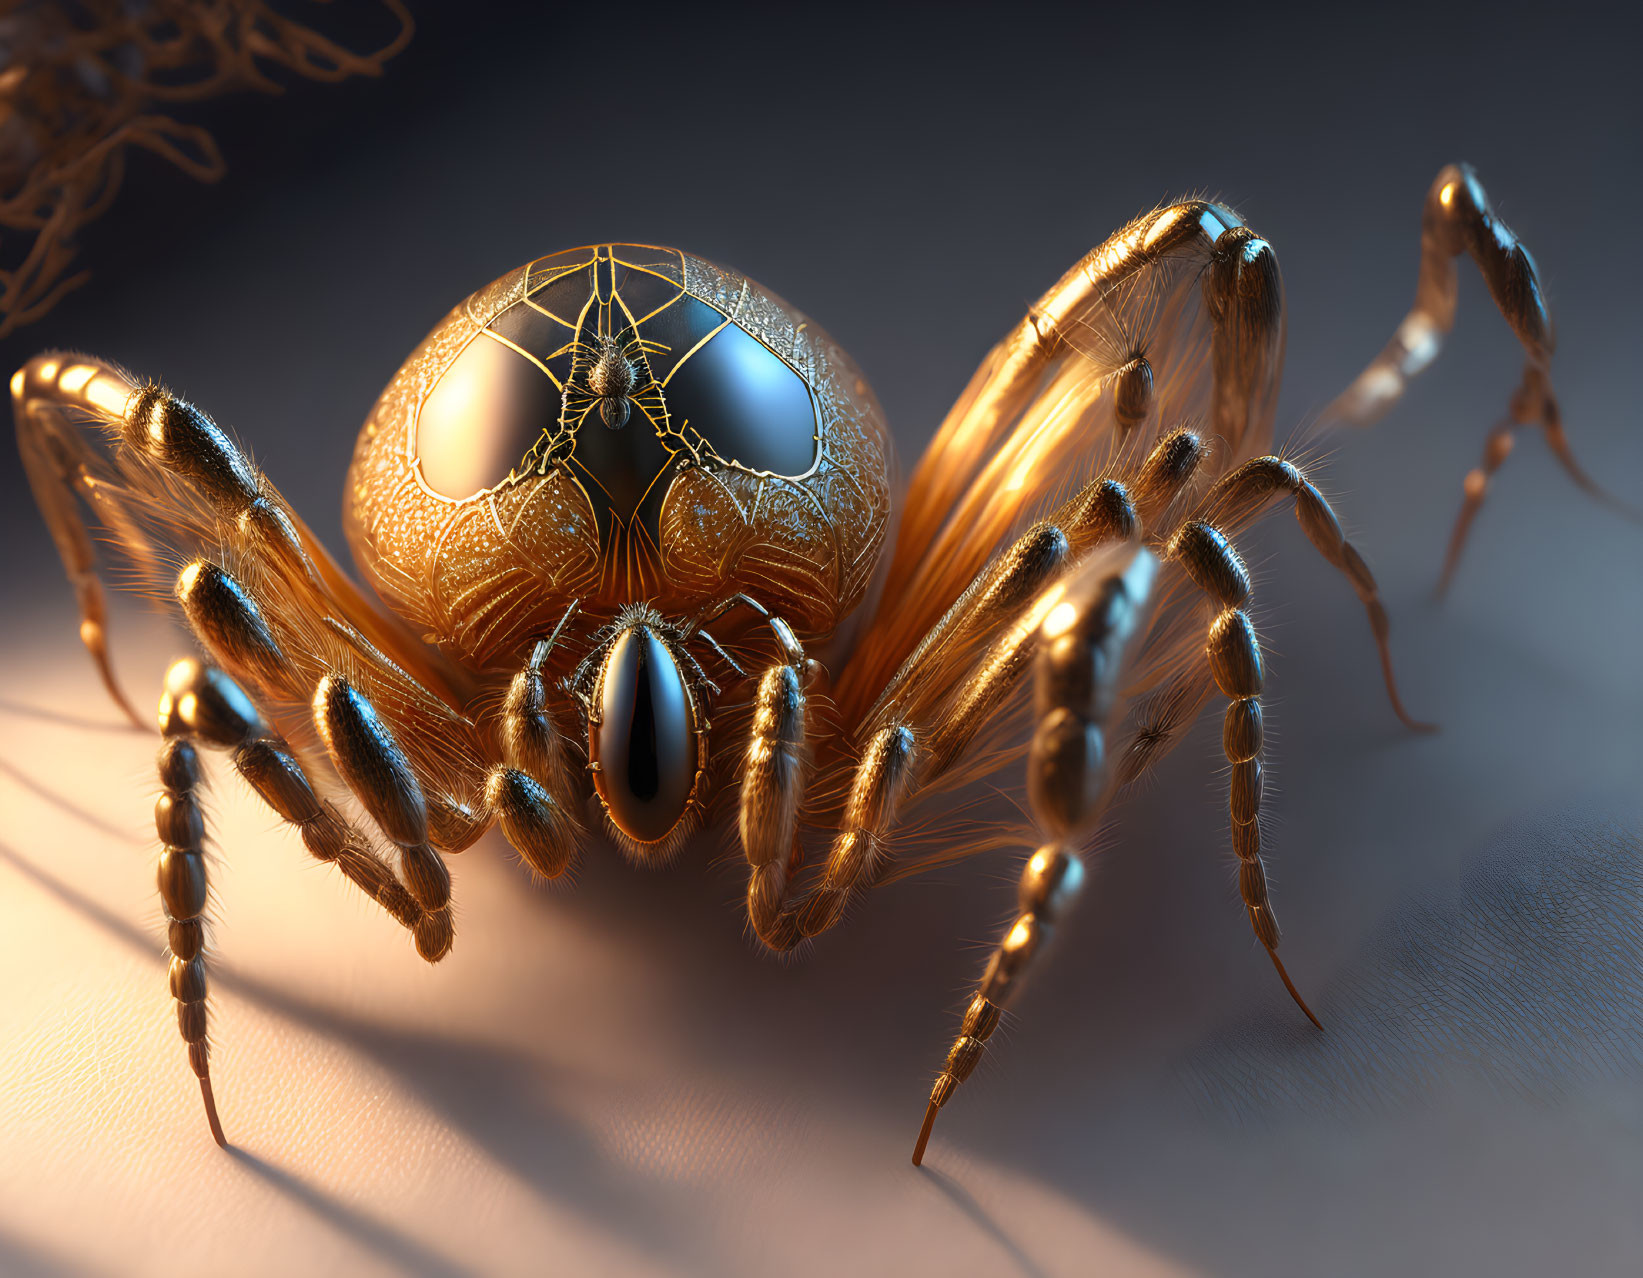 Golden Mechanical Spider with Glowing Eyes on Textured Surface